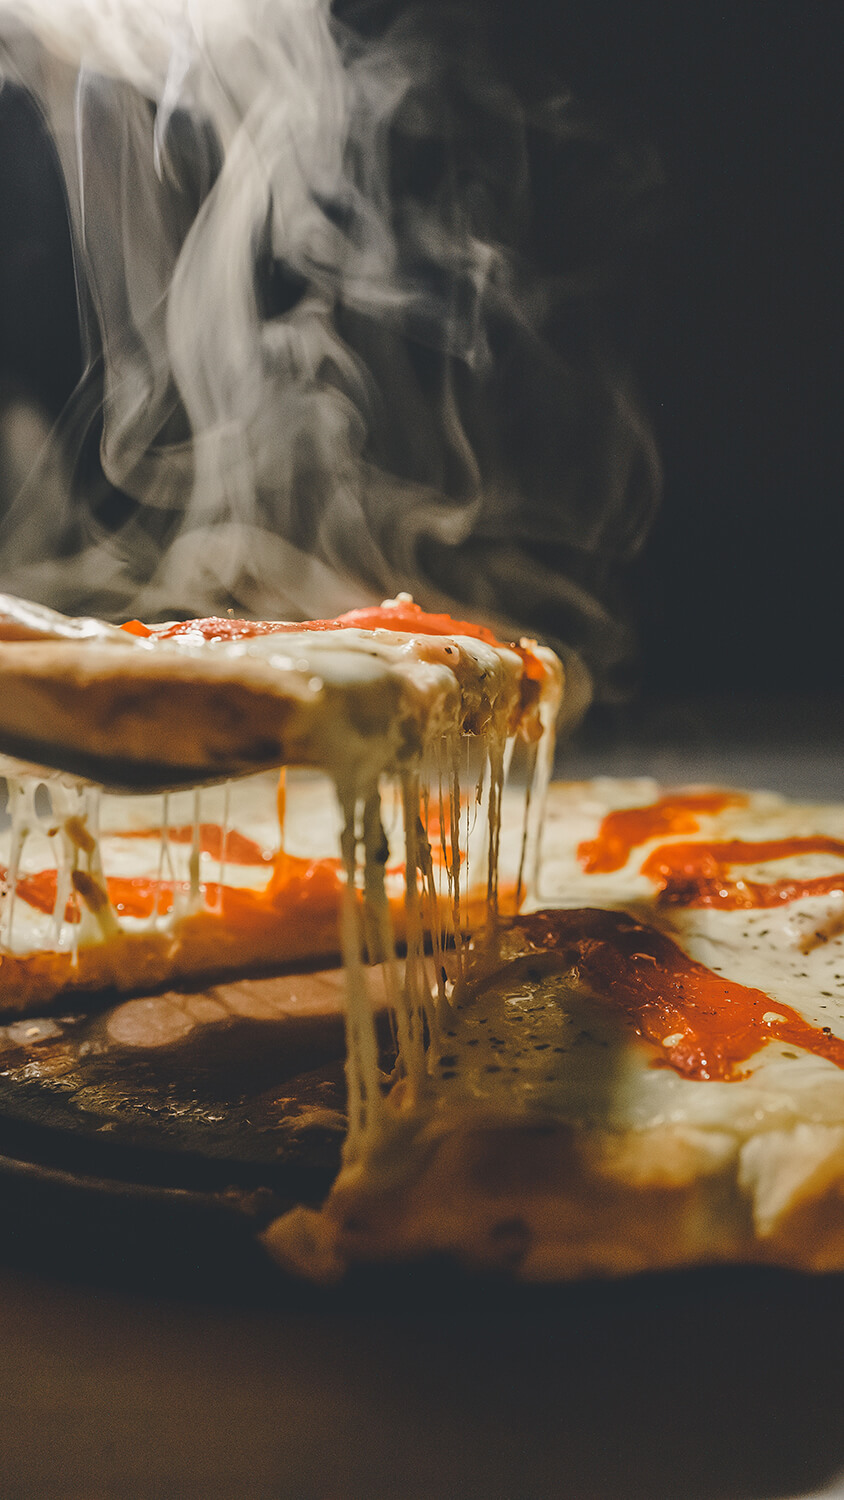 10 weirdest pizza toppings you wouldn’t have heard of